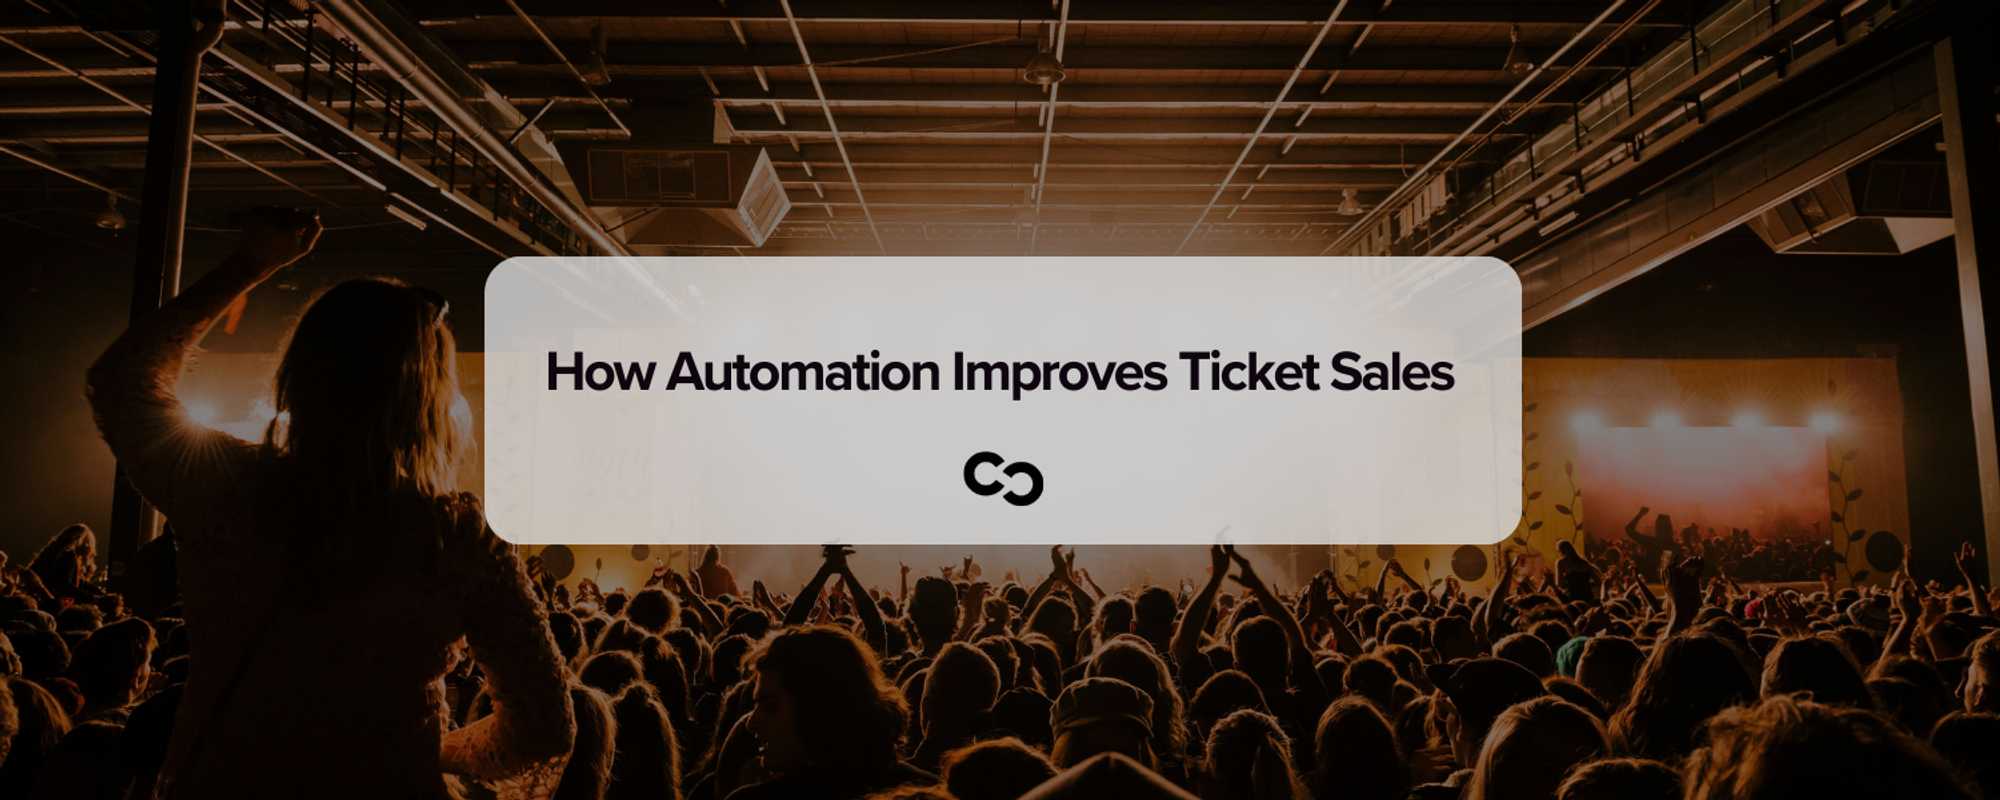 How Automation Improves Ticket Sales